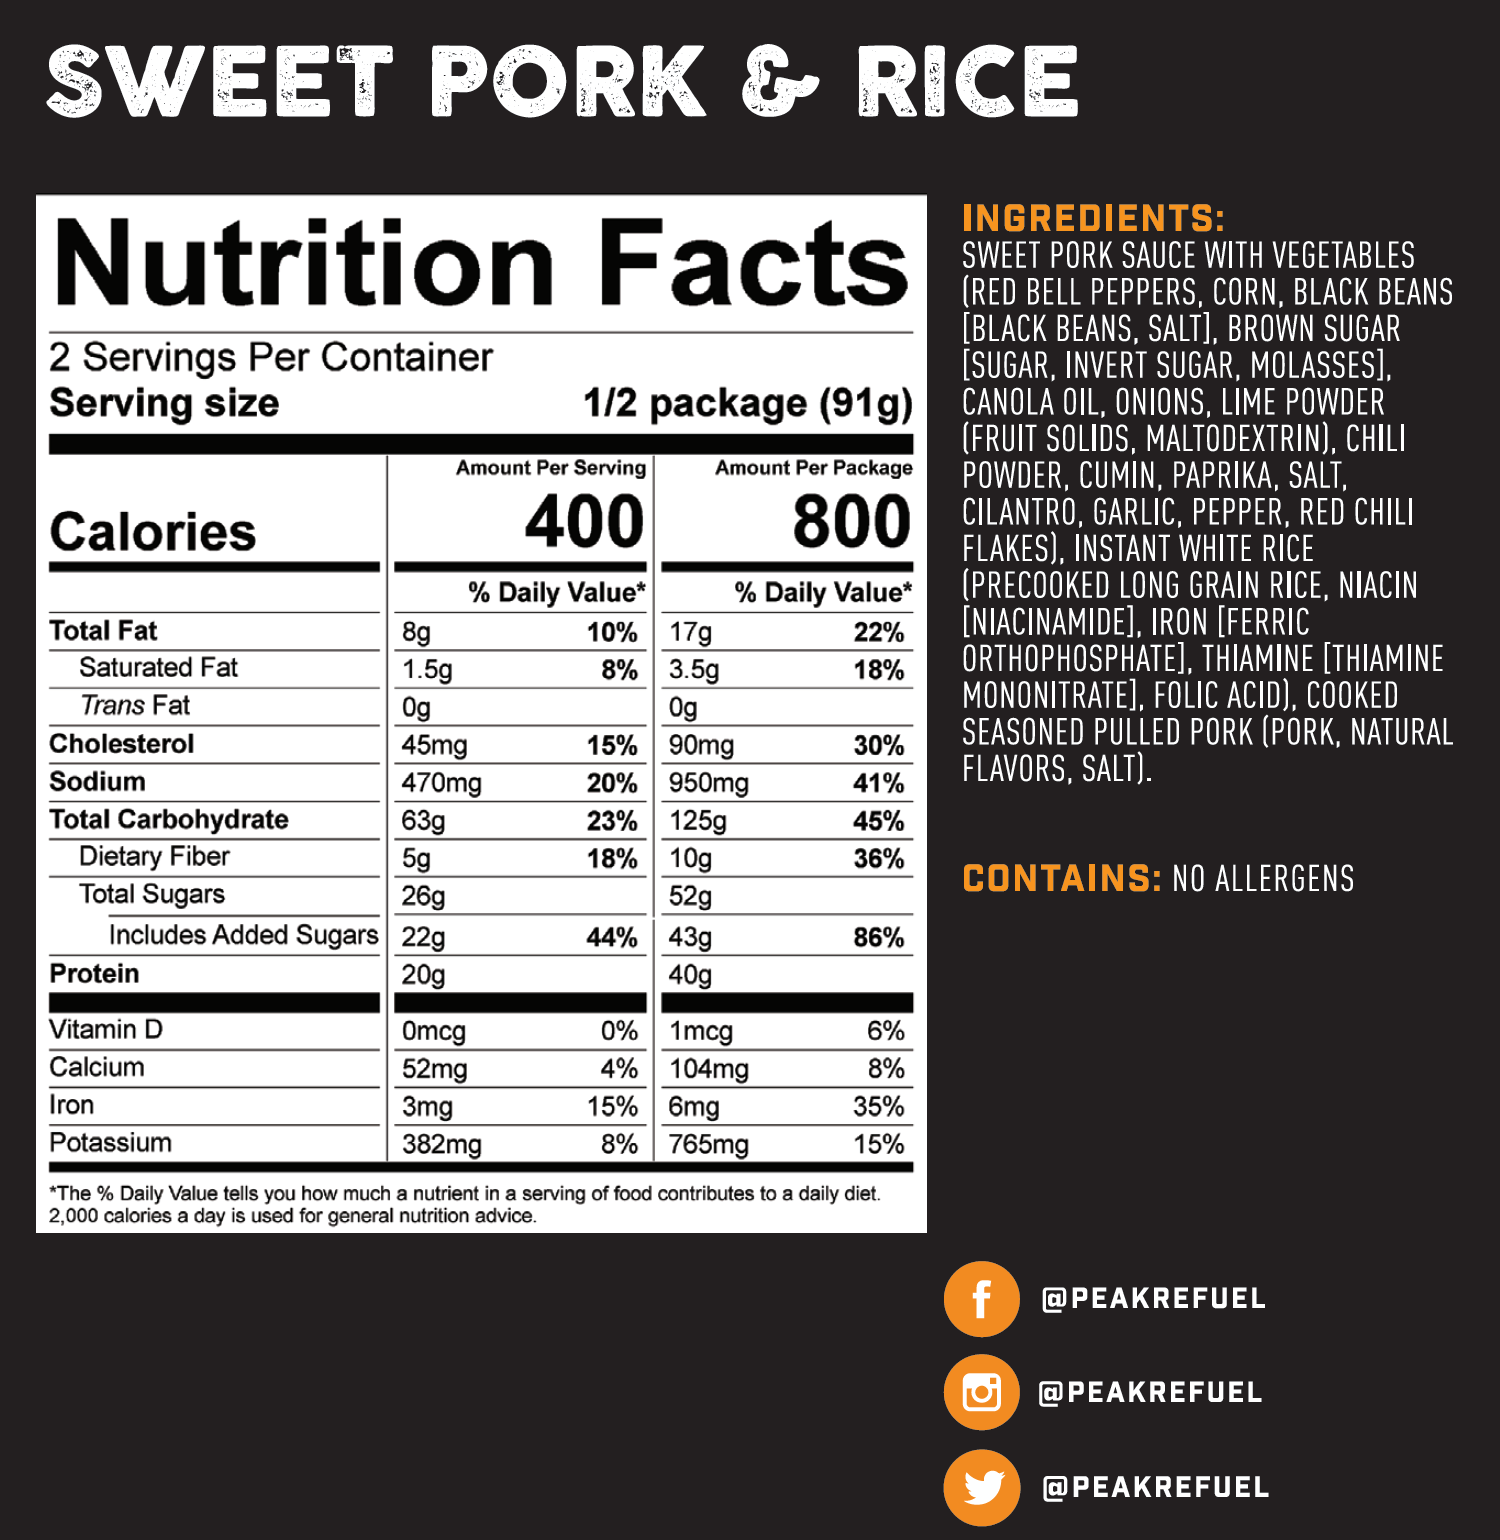 A nutrition facts and information label for the undefined product, providing essential details about its contents and values.